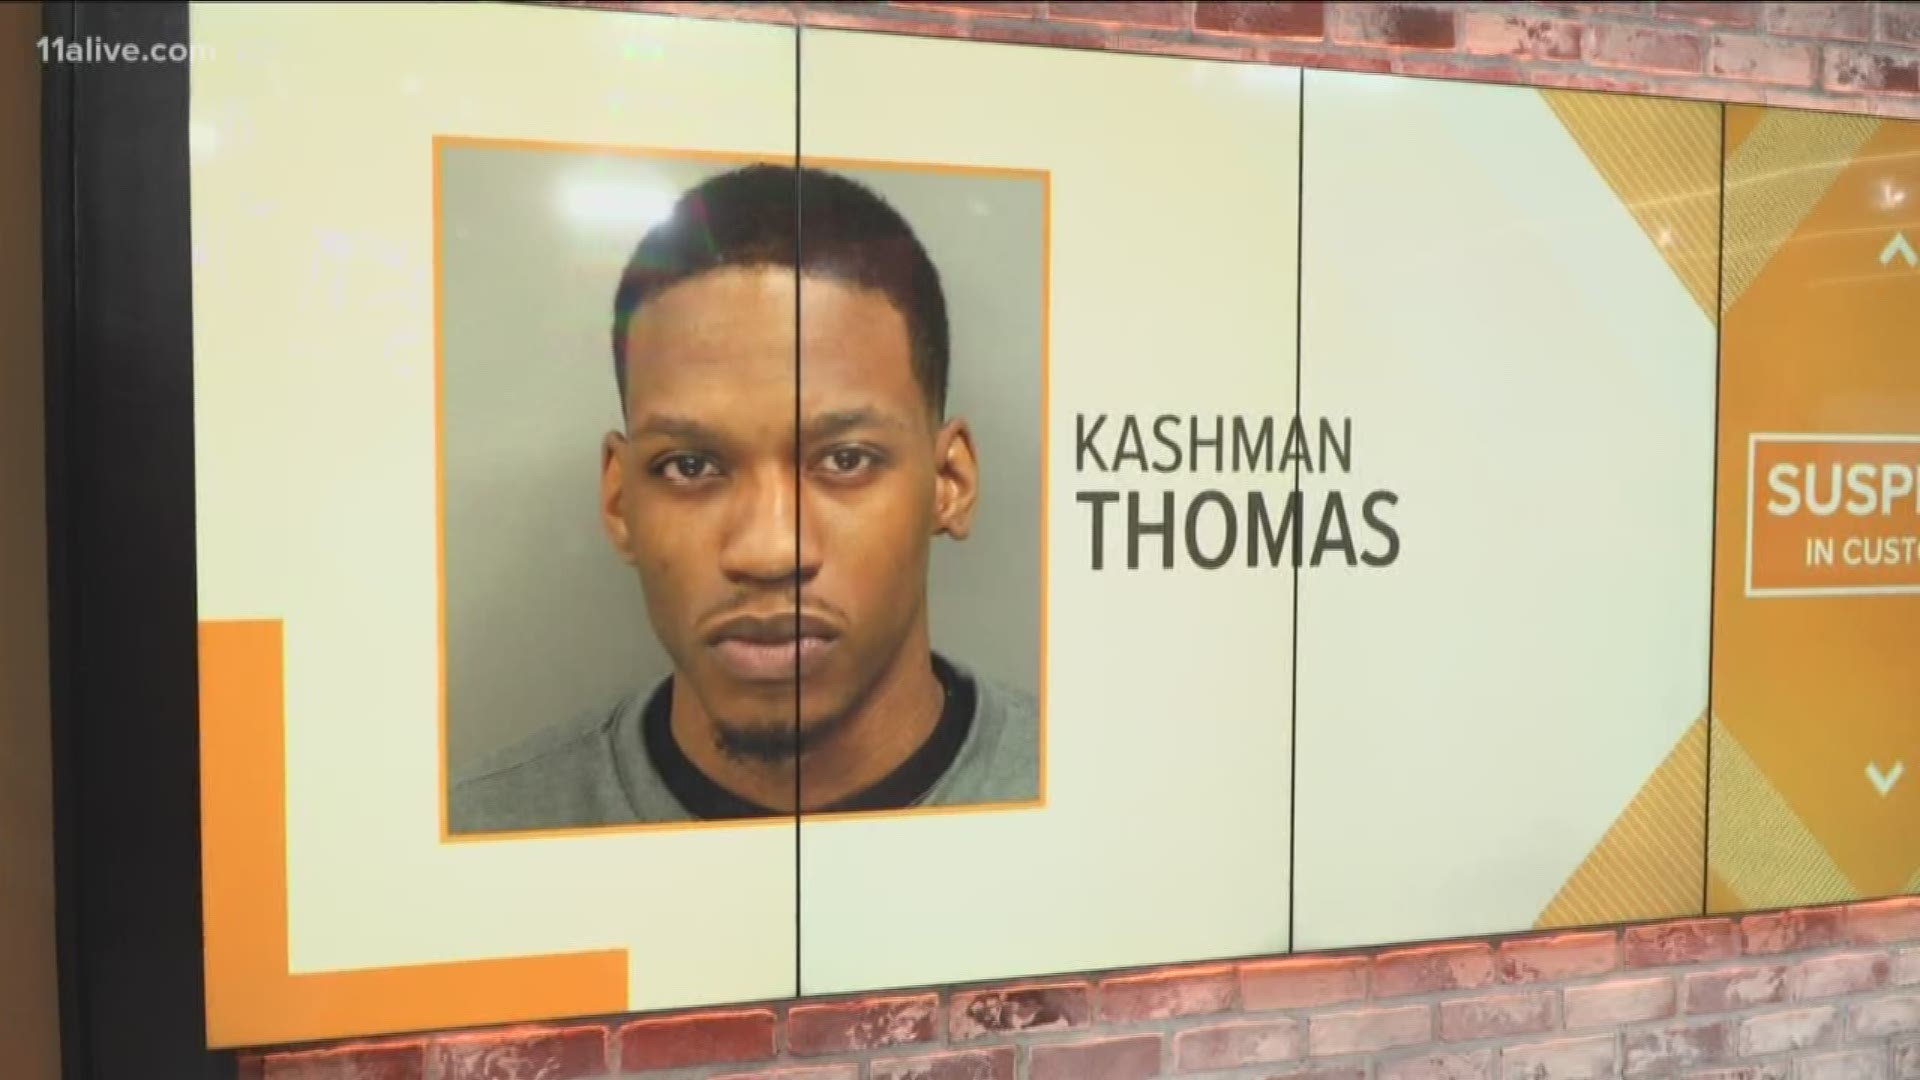 Kashman Thomas, 22, was arrested Tuesday after turning himself over to police at the Cobb County Jail, according to police.